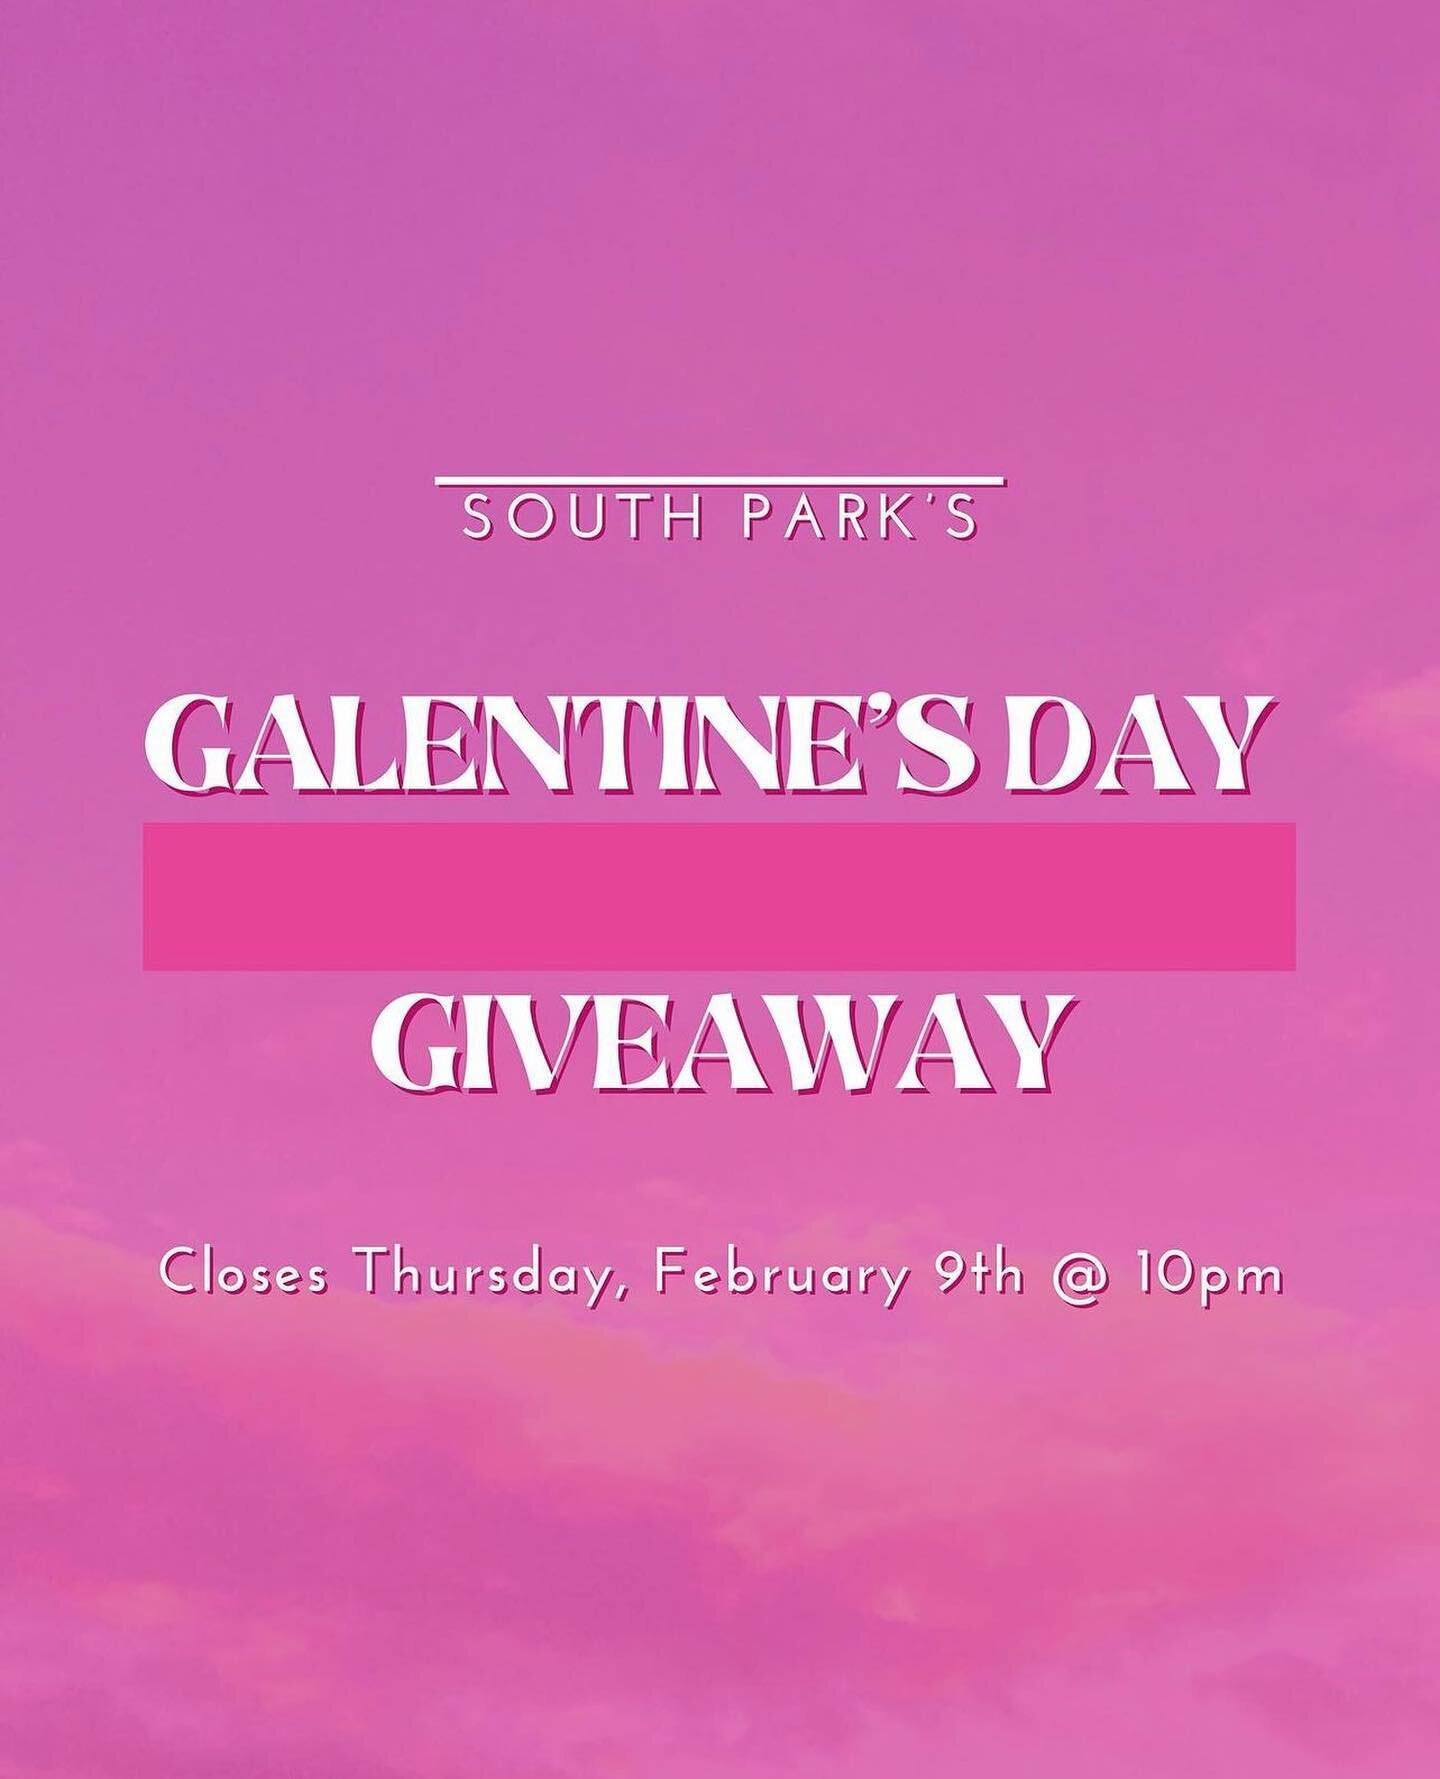 South Park's Galentine's Day Giveaway! 🌹

Some of your favorite @southparksandiego businesses are teaming up to giveaway a $460 shopping spree to one lucky winner. 
&bull;
The idea is for you and your Galentine to enjoy a Galentine's Day hanging out